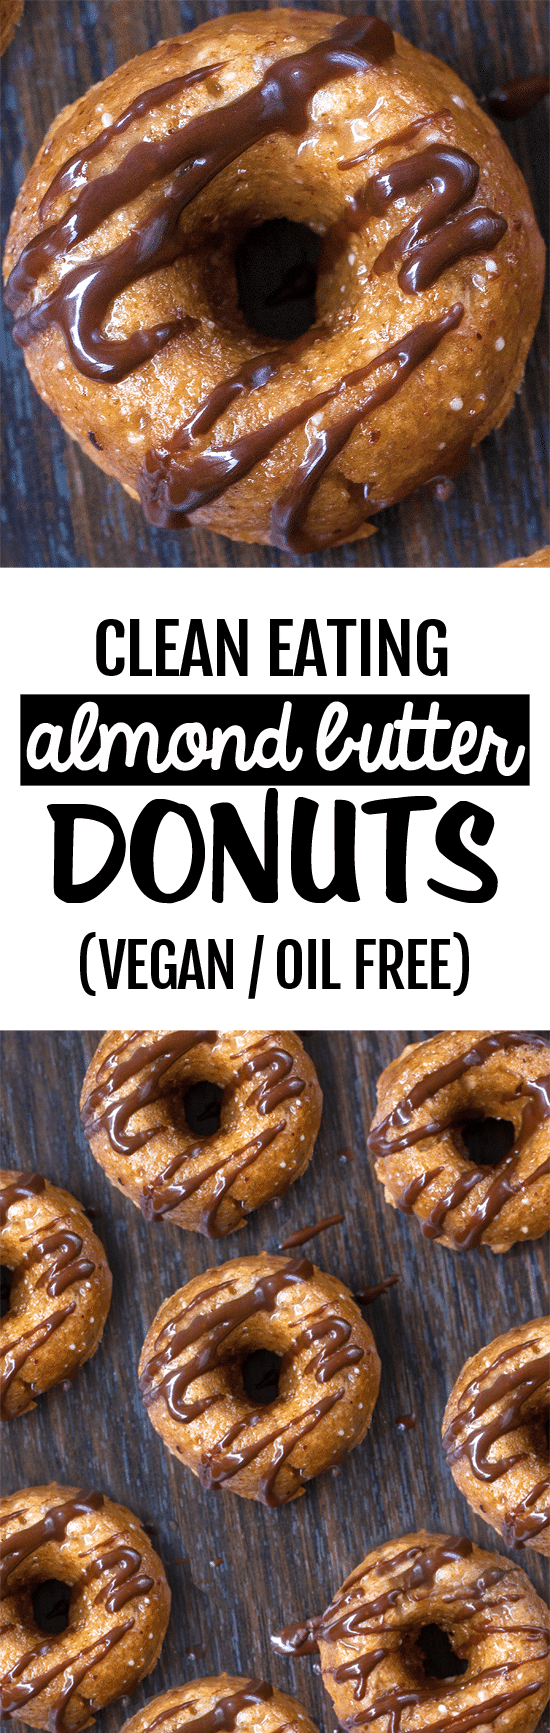 Healthy Oil Free Baked Almond Butter Donut Recipe